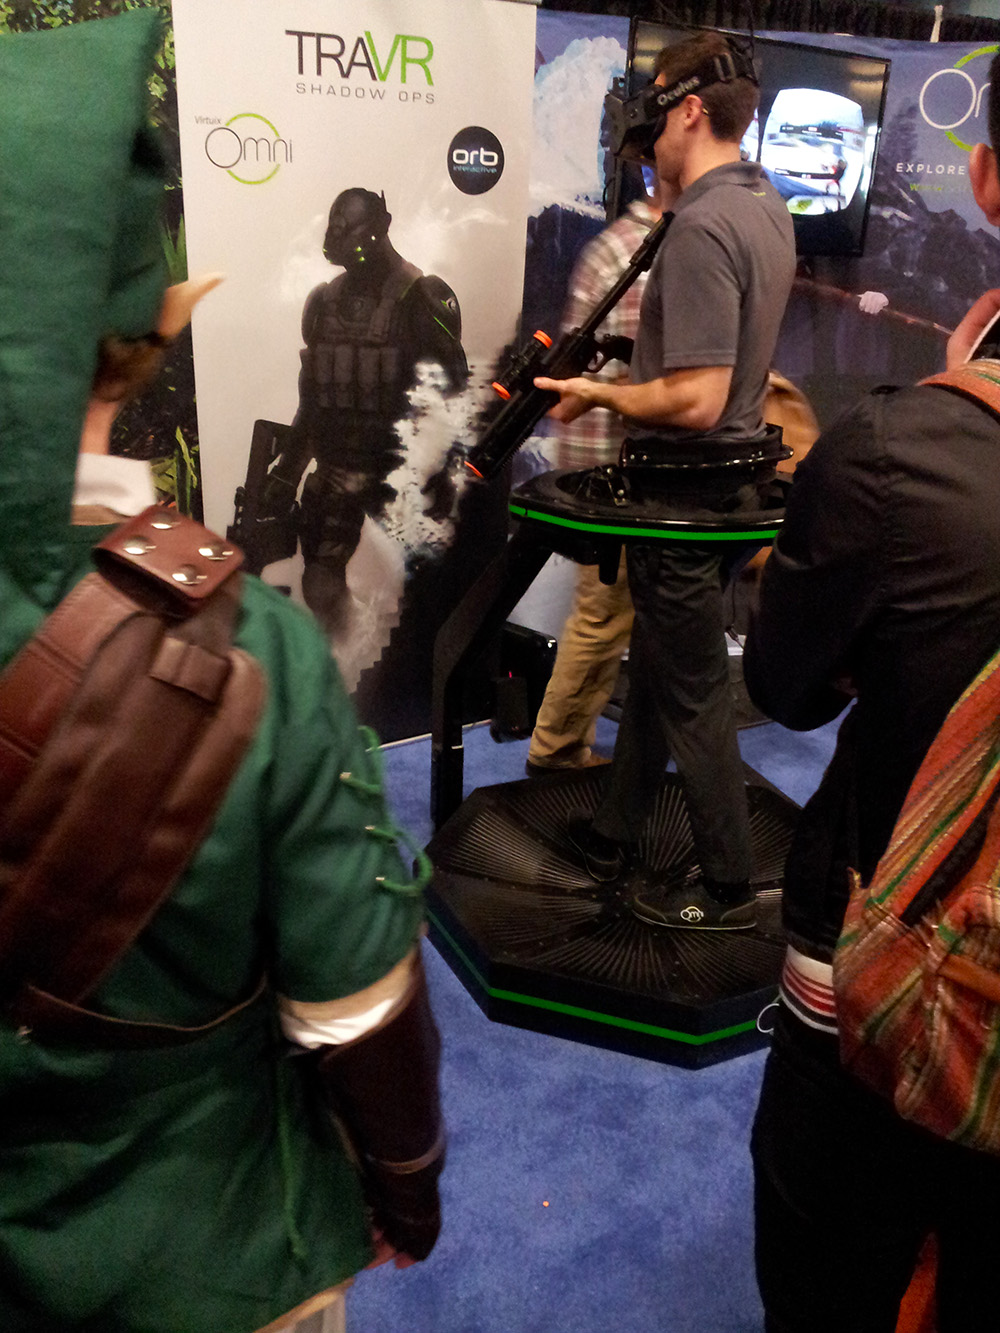 A kid wearing a Link costume from Legend of Zelda looks on while someone wearing an Oculus Rift plays TraVR Shadow Ops.